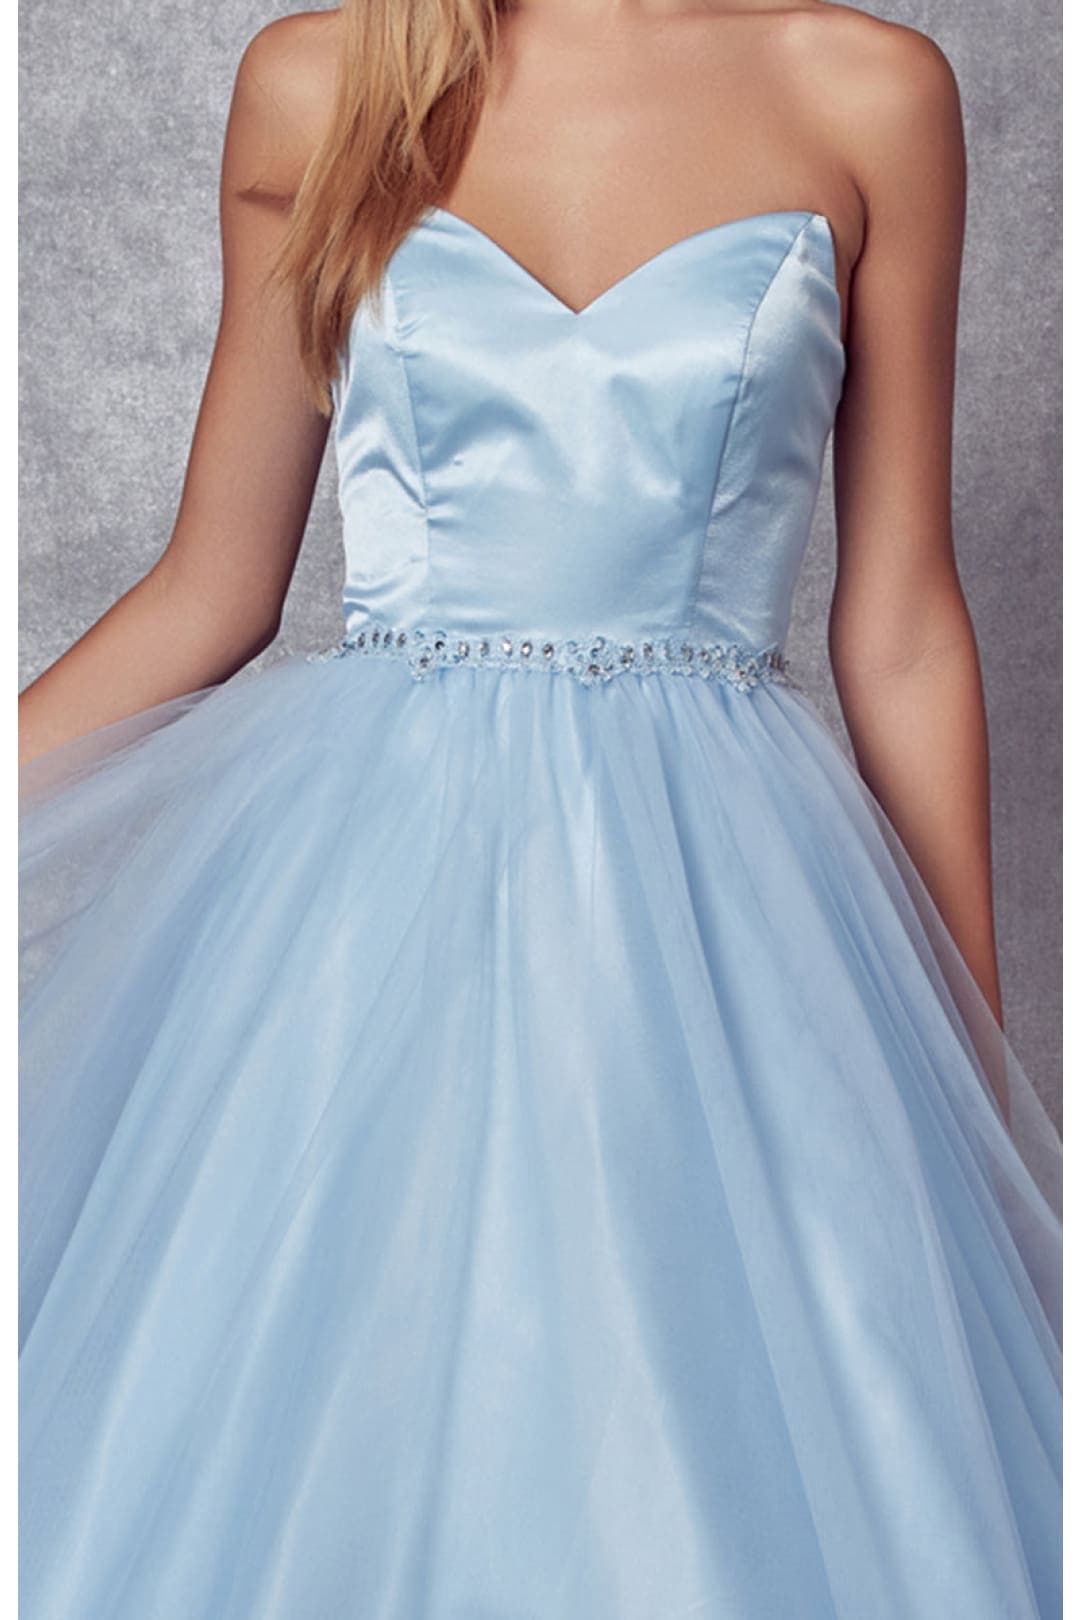 Pageant Formal Gown